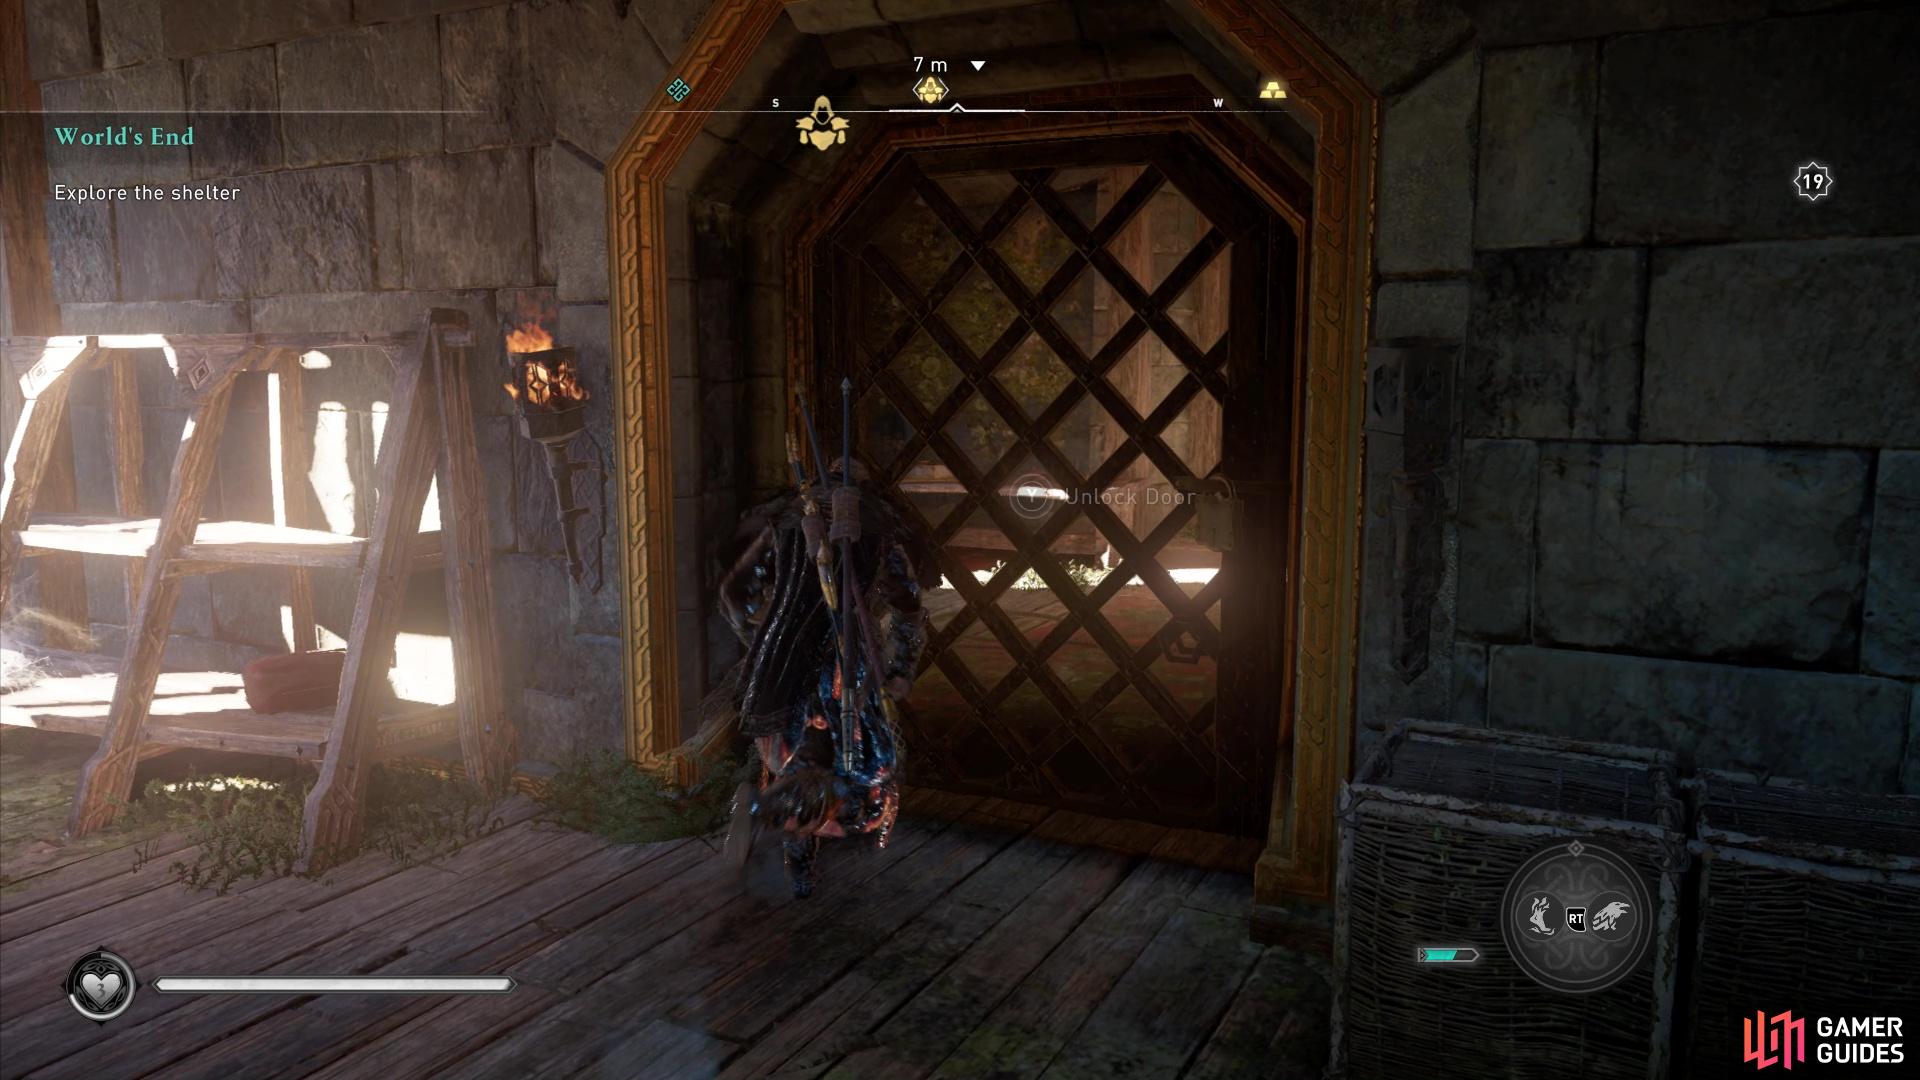 Then head to the second tallest building and use the key to unlock the door to where you'll find the chest.